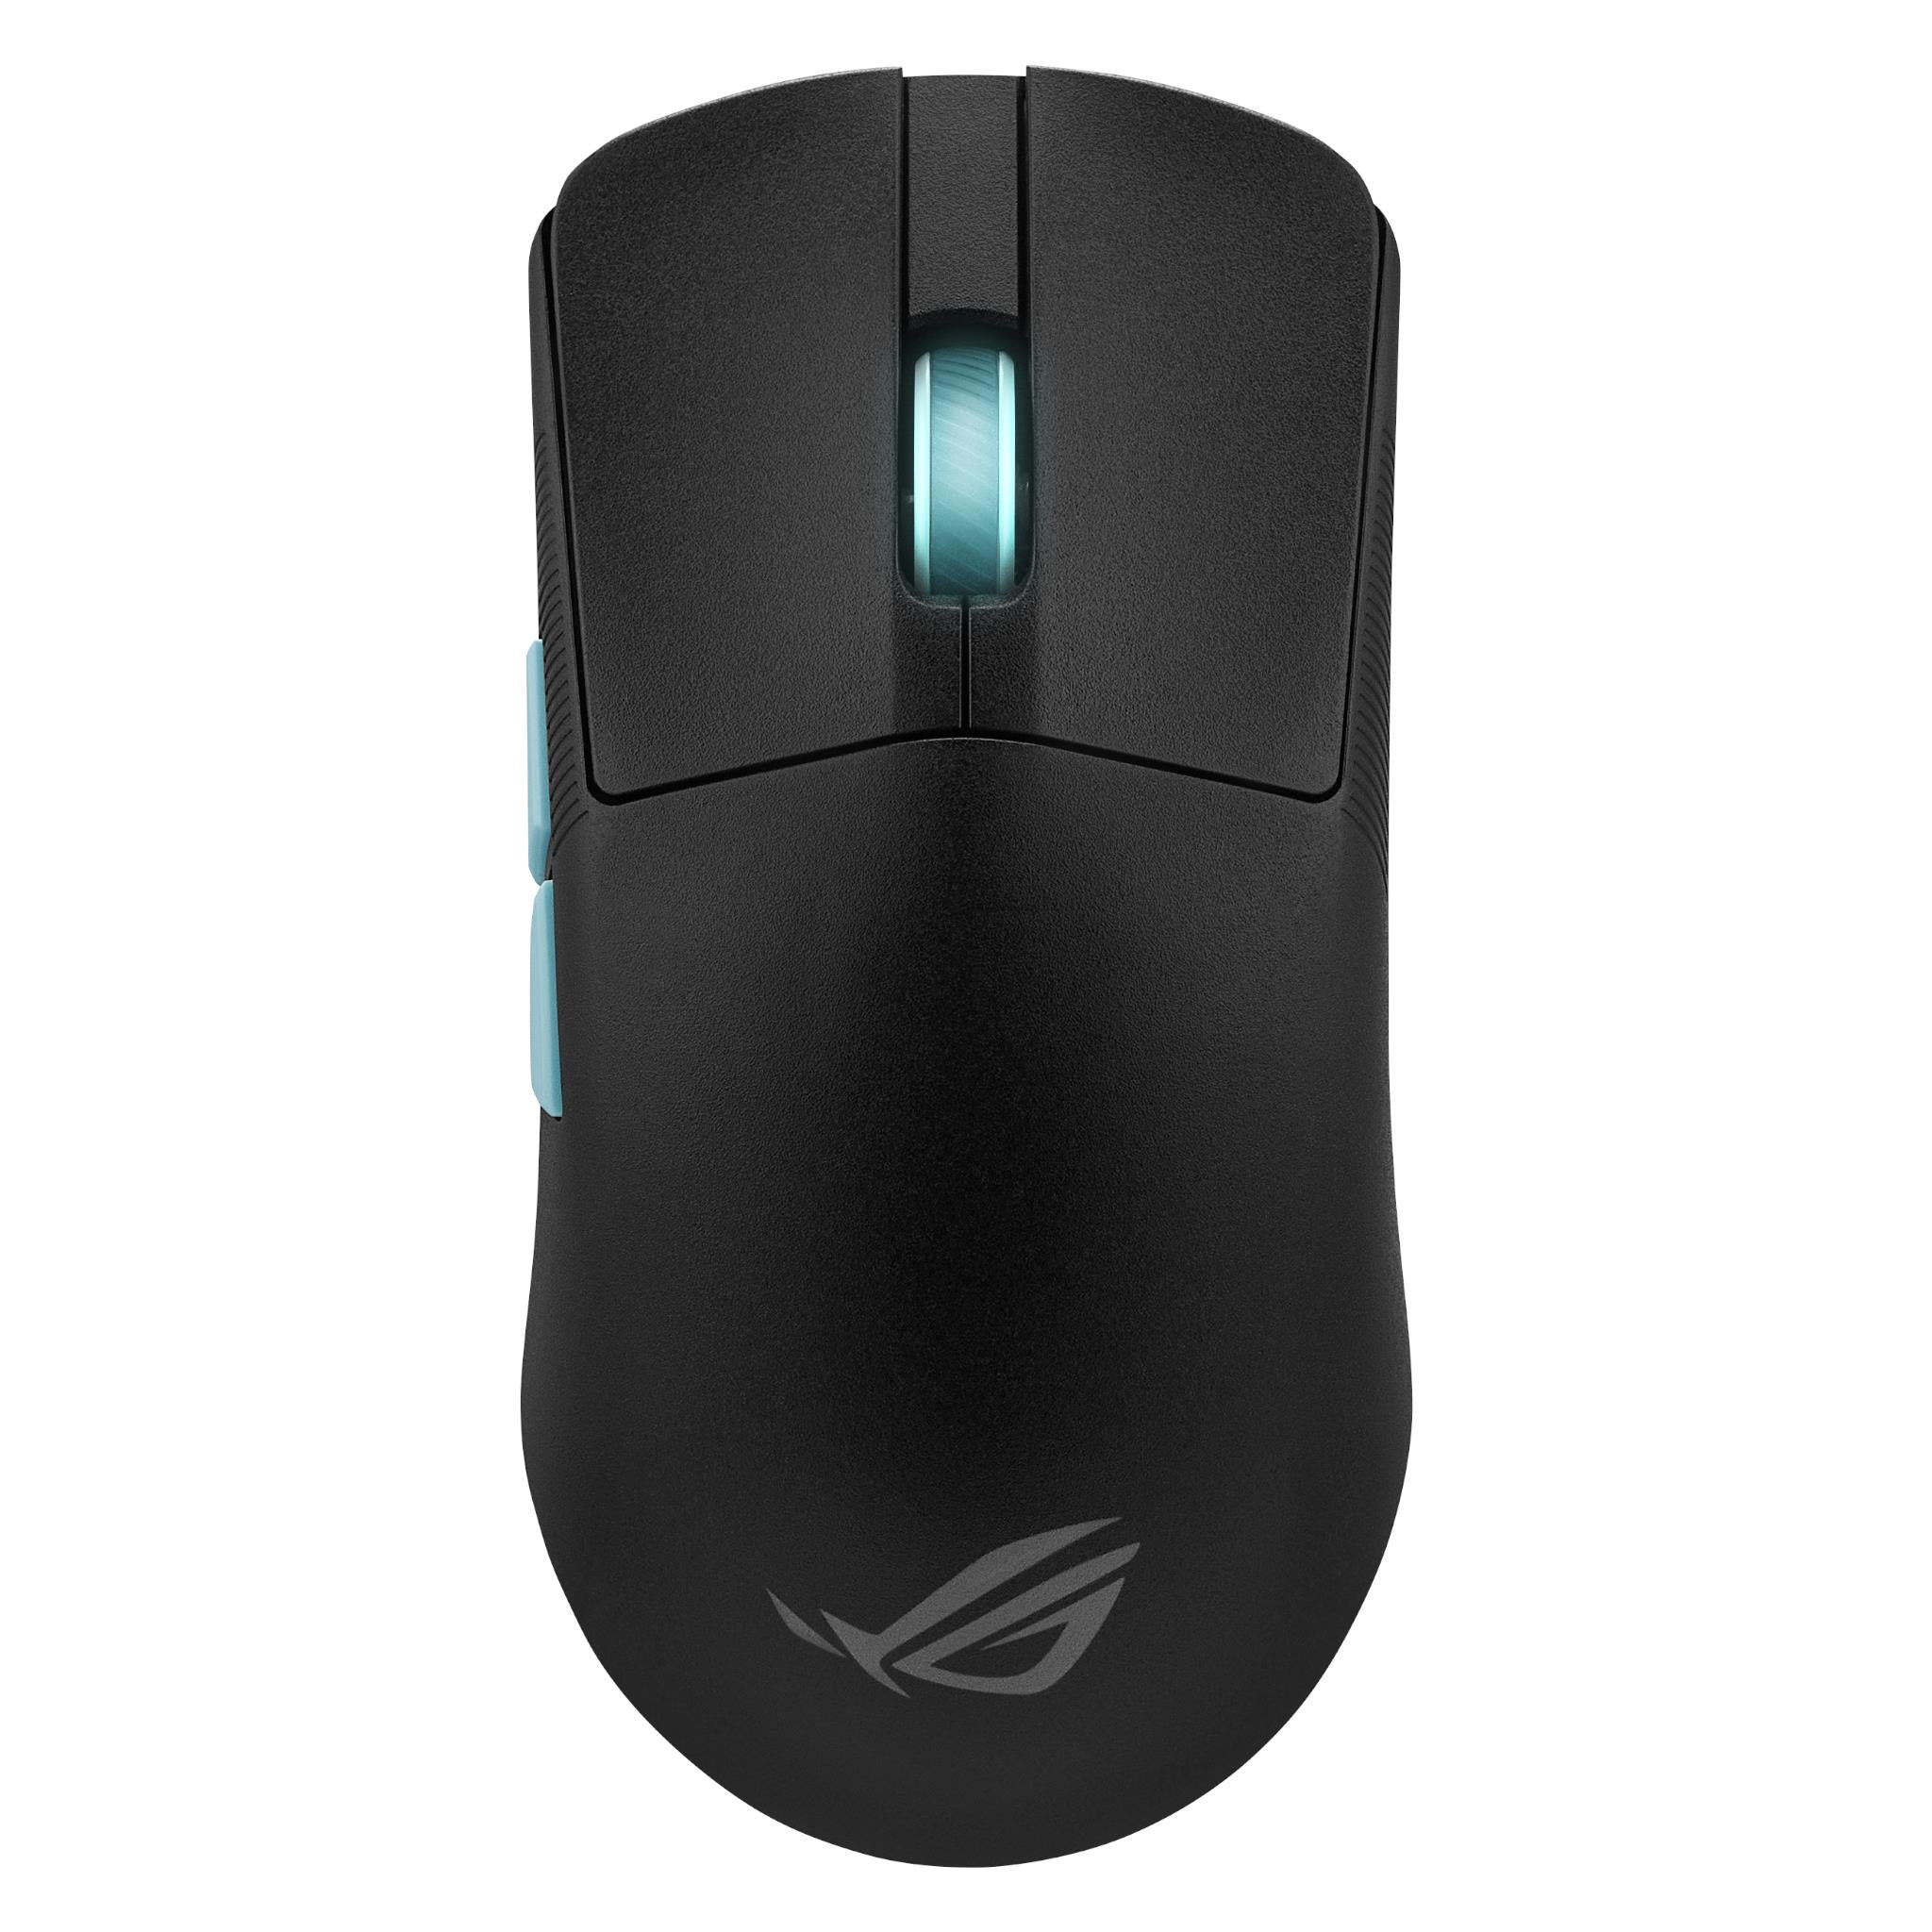 asus rog harpe ace ultralight wireless mouse aim lab edition